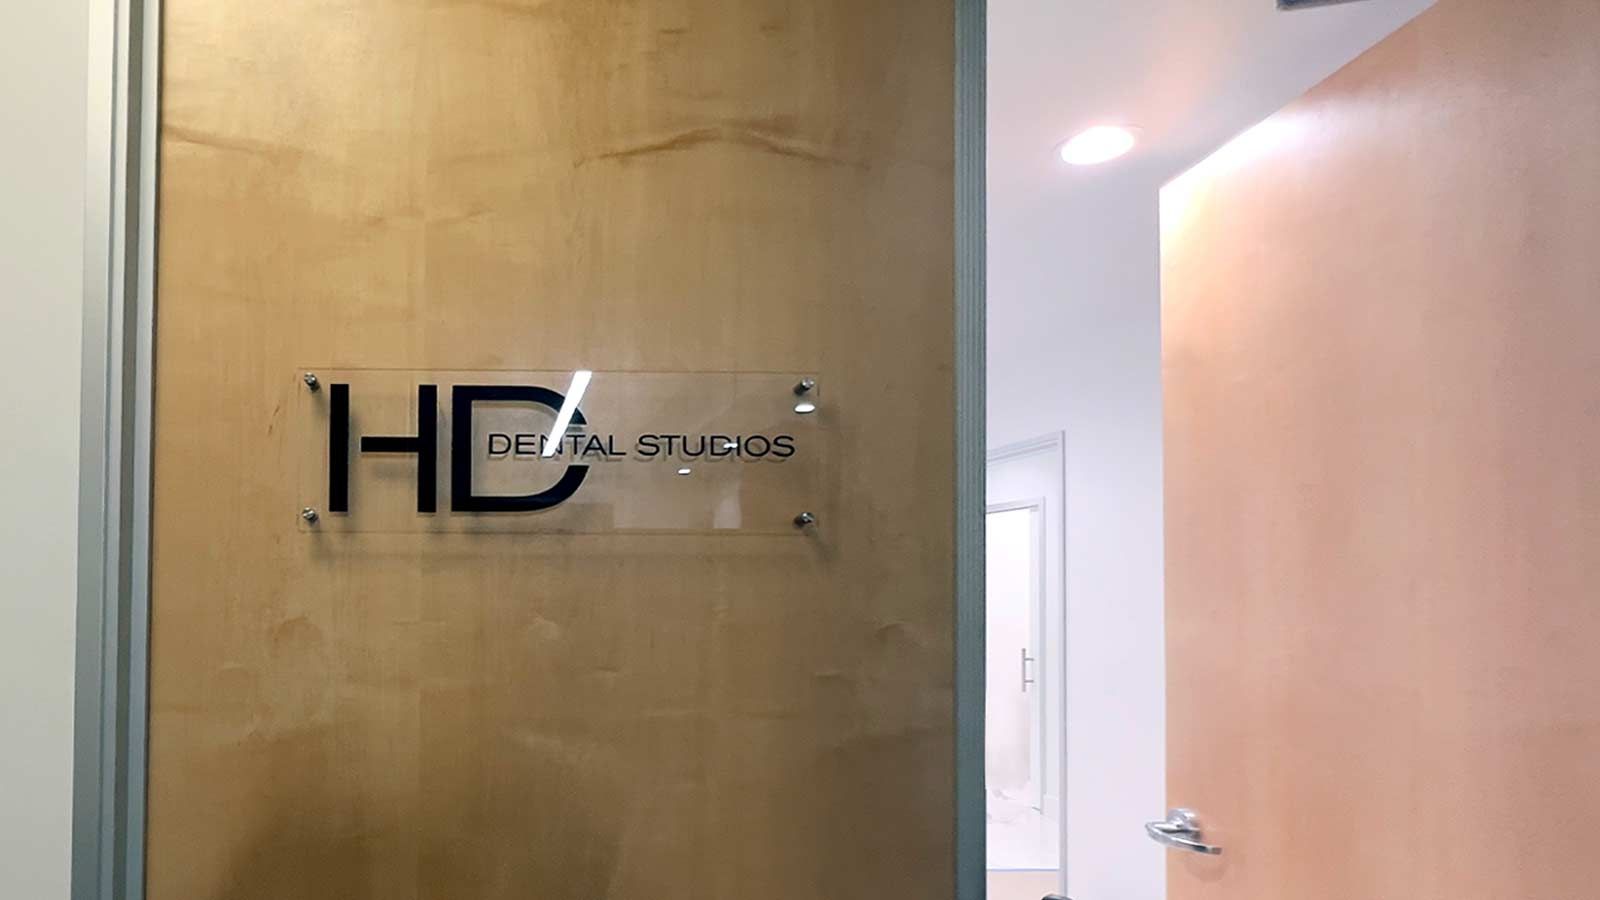 HD Dental Studios office sign attached to the wall